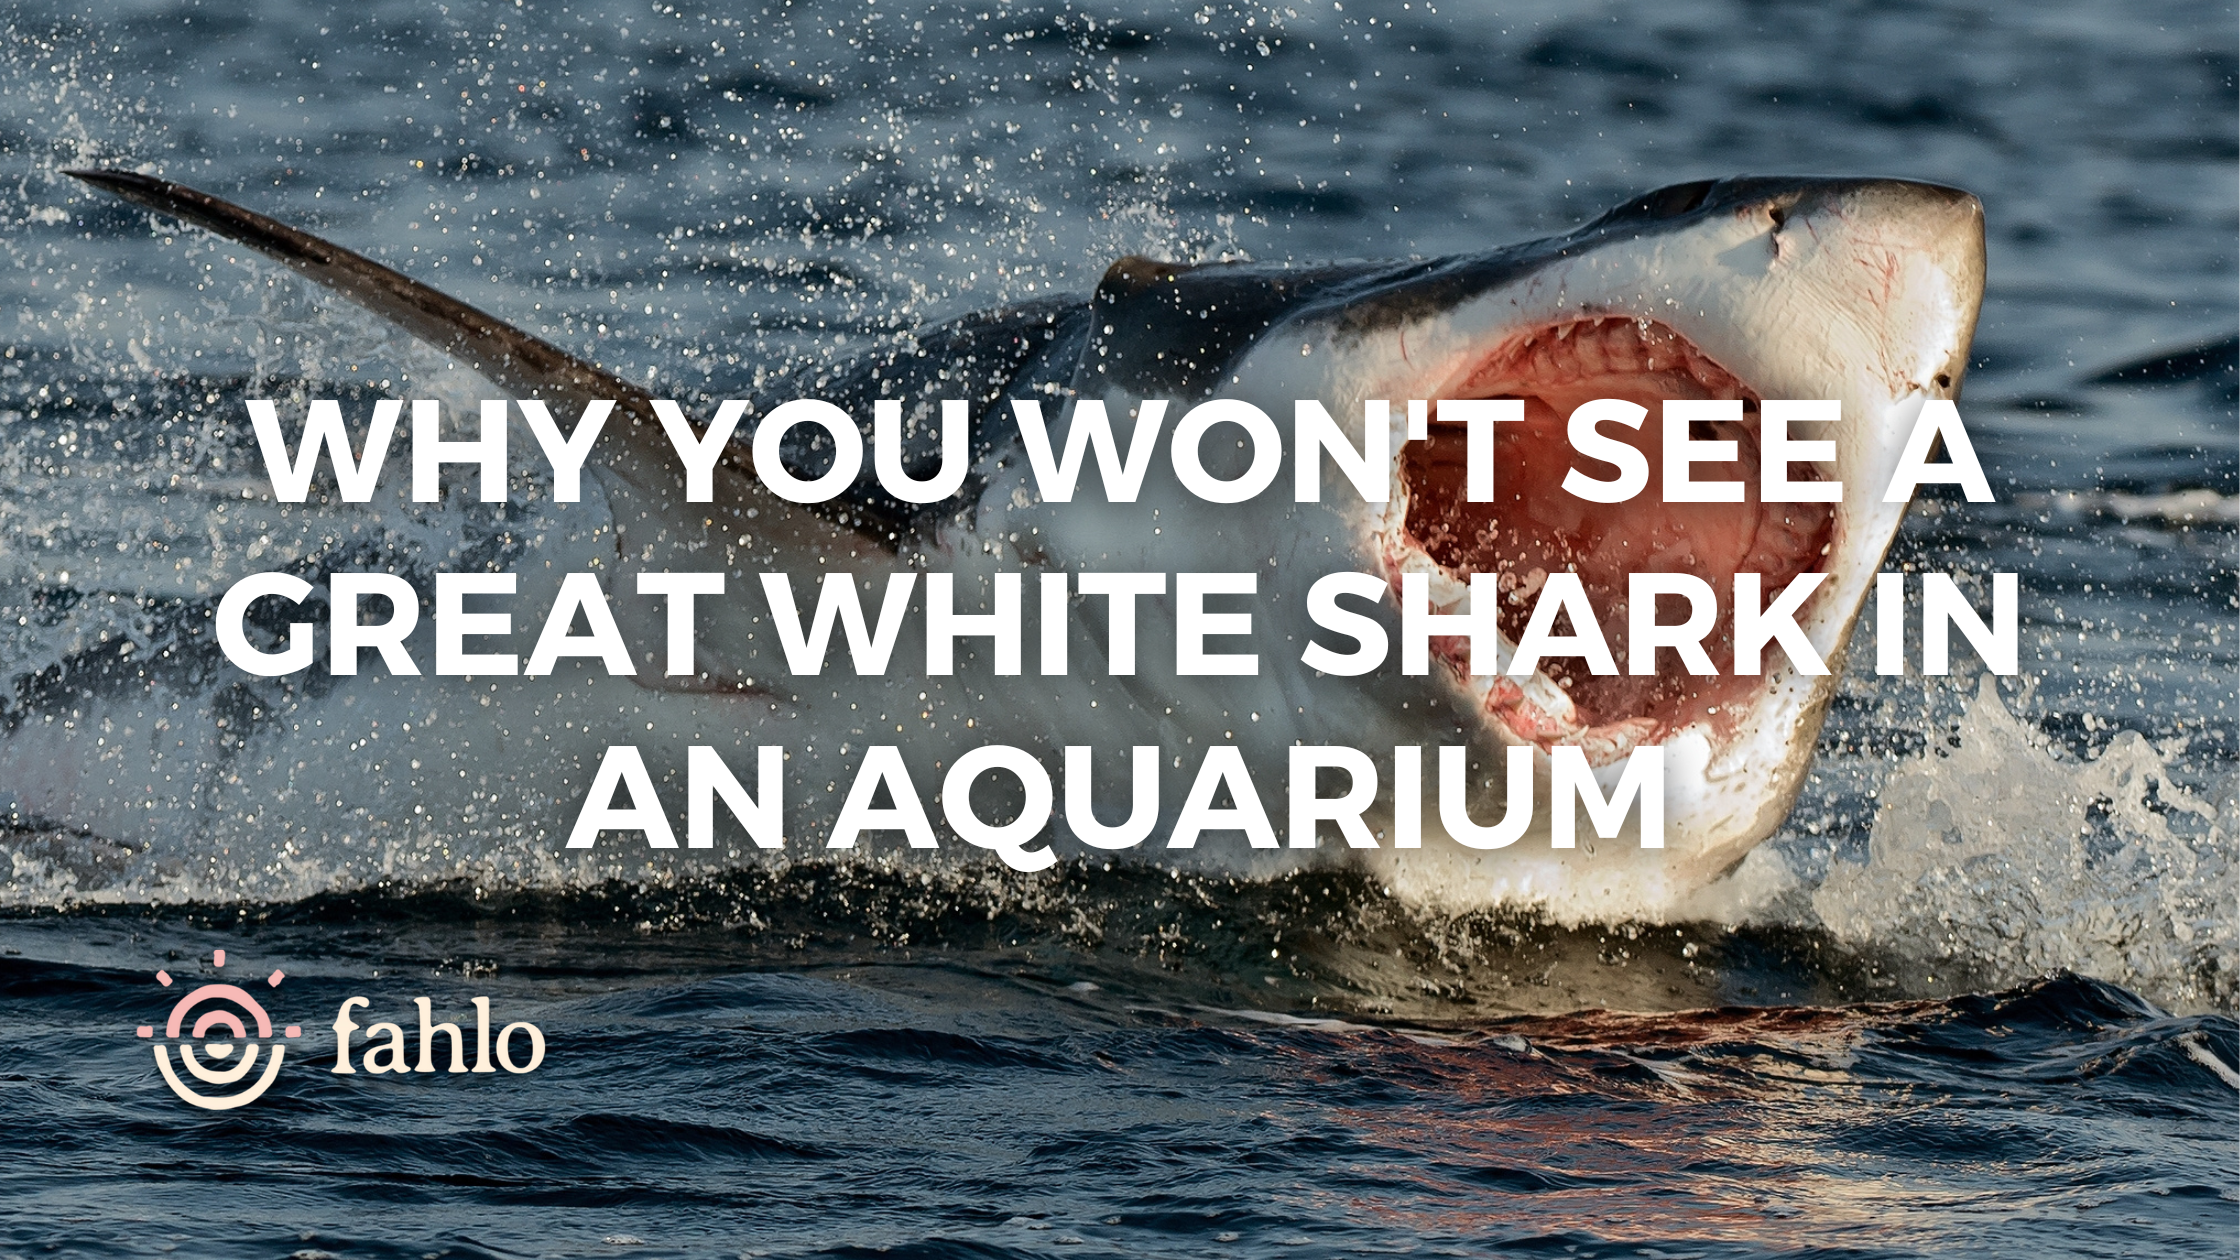 Why You Won't See A Great White Shark In An Aquarium